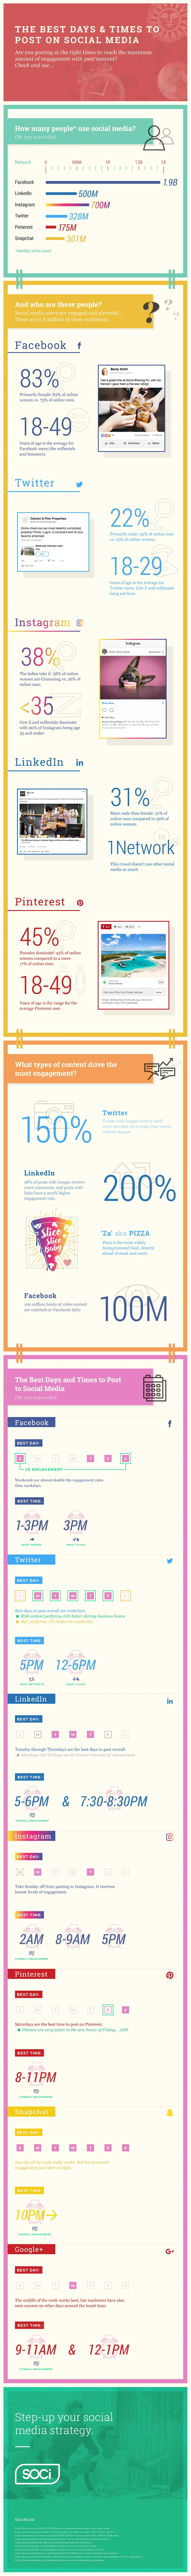 The Best Days and Times to Post to Social Media - #infographic